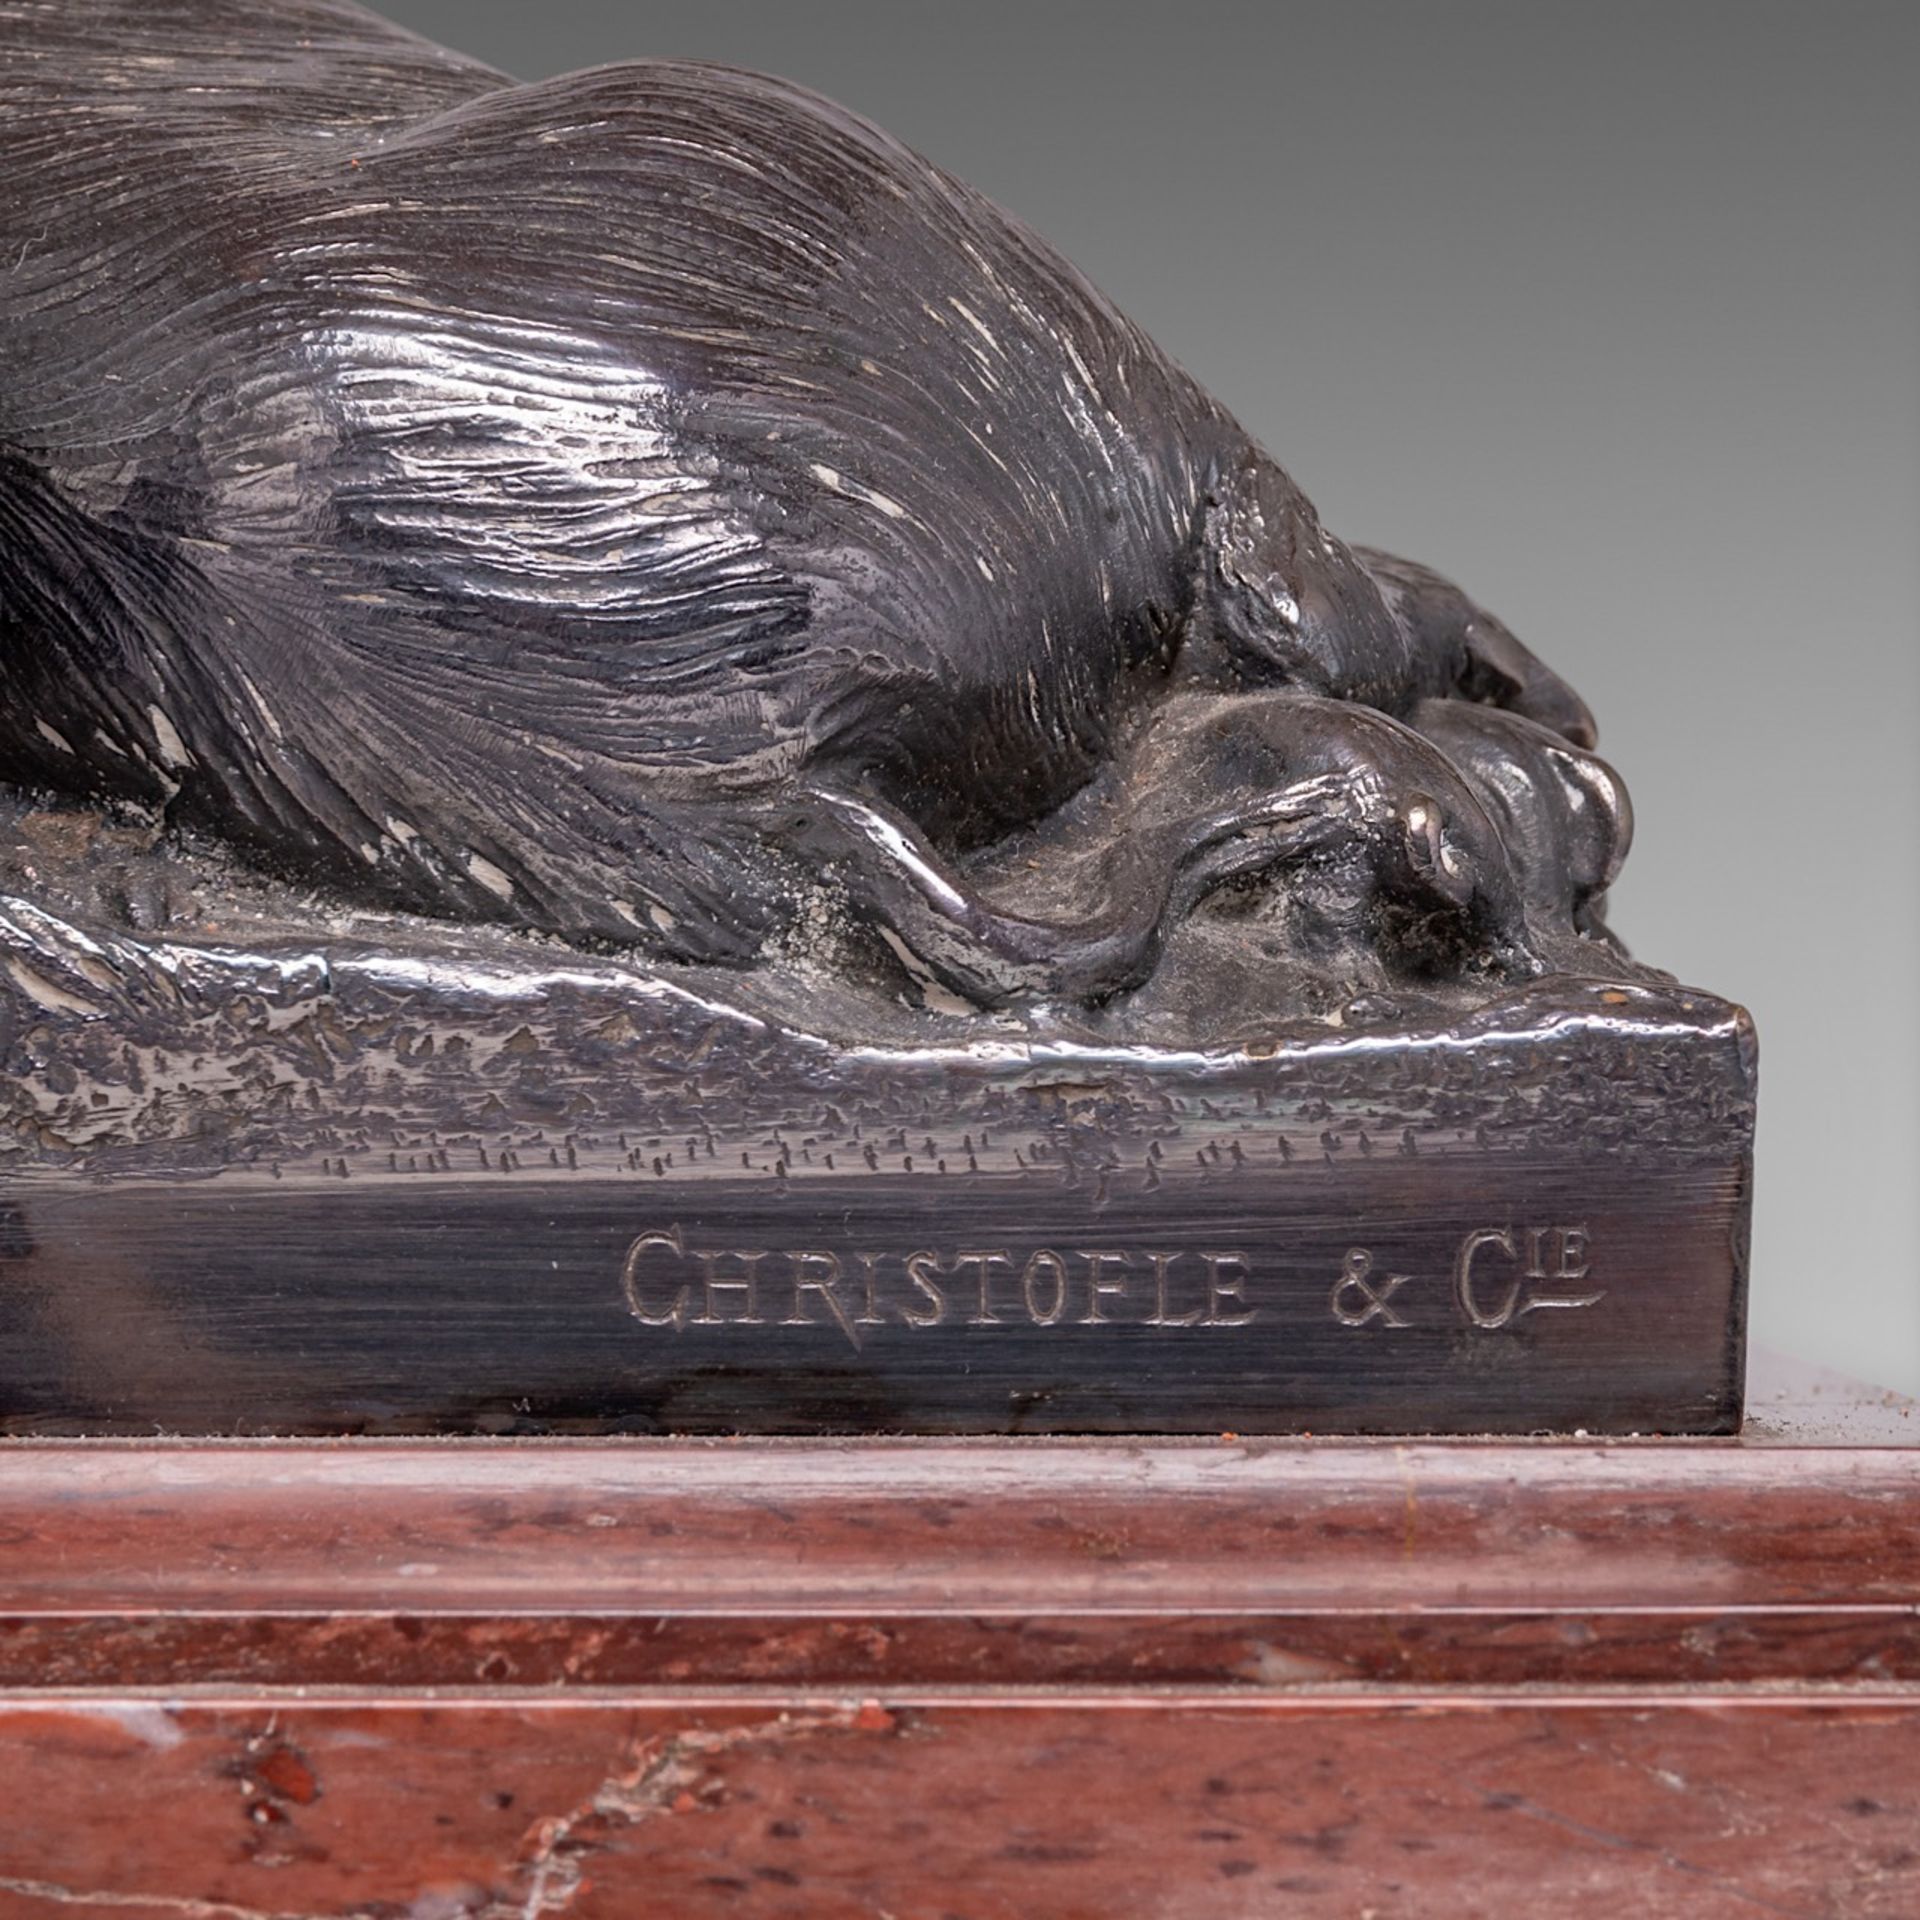 A silver-plated bronze group of three pigs, cast by Christofle & Cie, 1877, H 27,5 - W 33,5 cm - Image 6 of 6